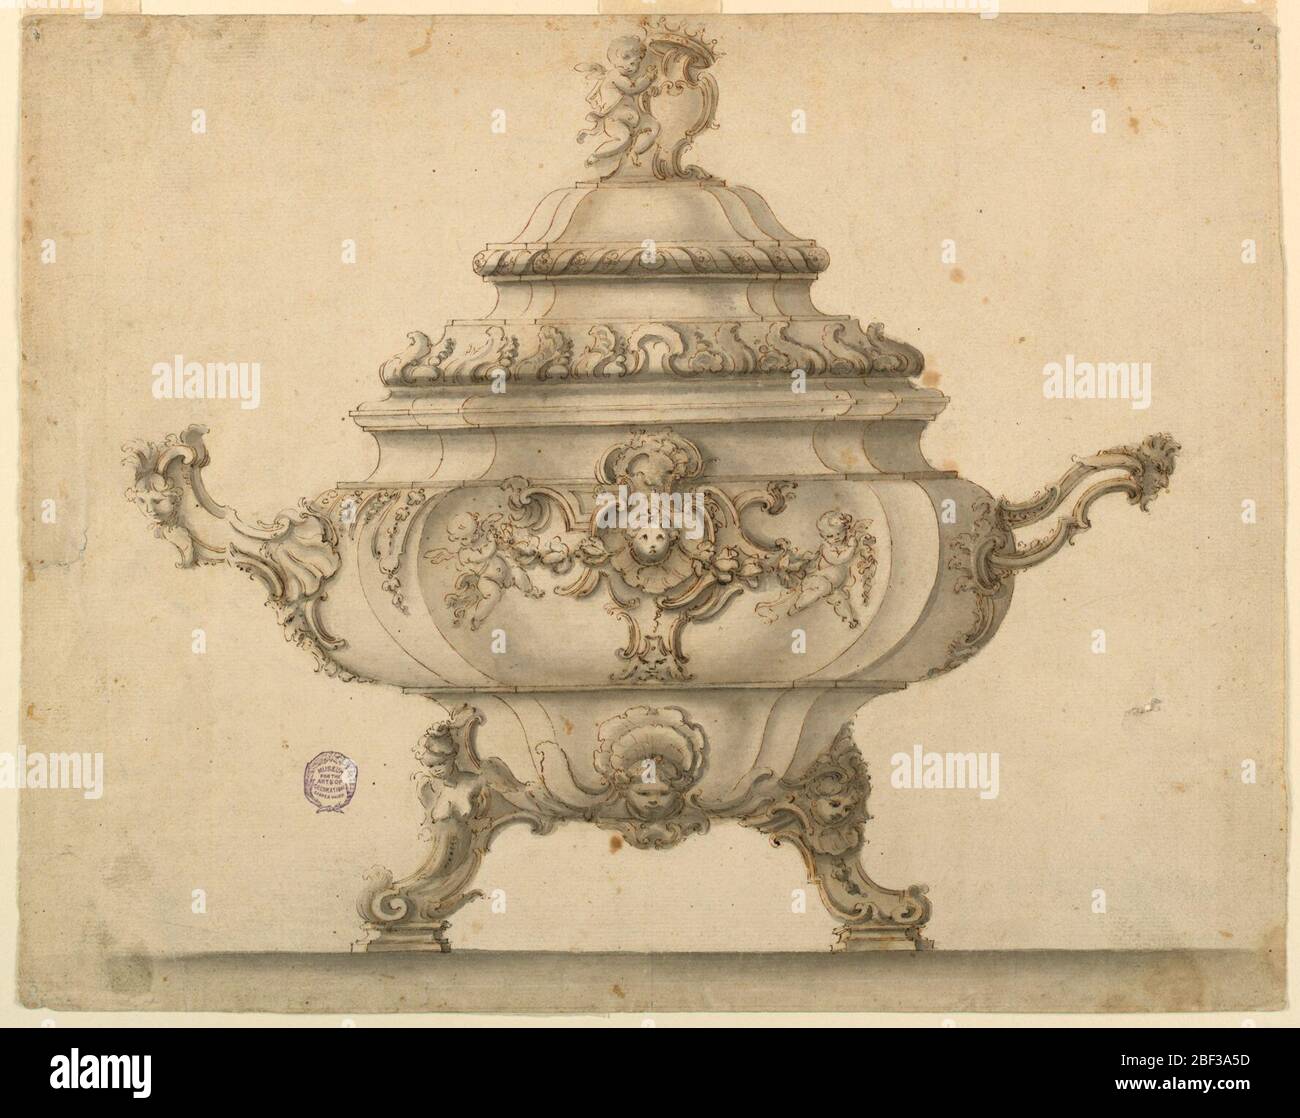 Tureen. Design for a tureen with alternative suggestions. On top of cover is a putto supporting an escutcheon with a crown. C-and S-curve decorations throughout. Scrolling feet and handles with masks. Right handle is pierced. Stock Photo